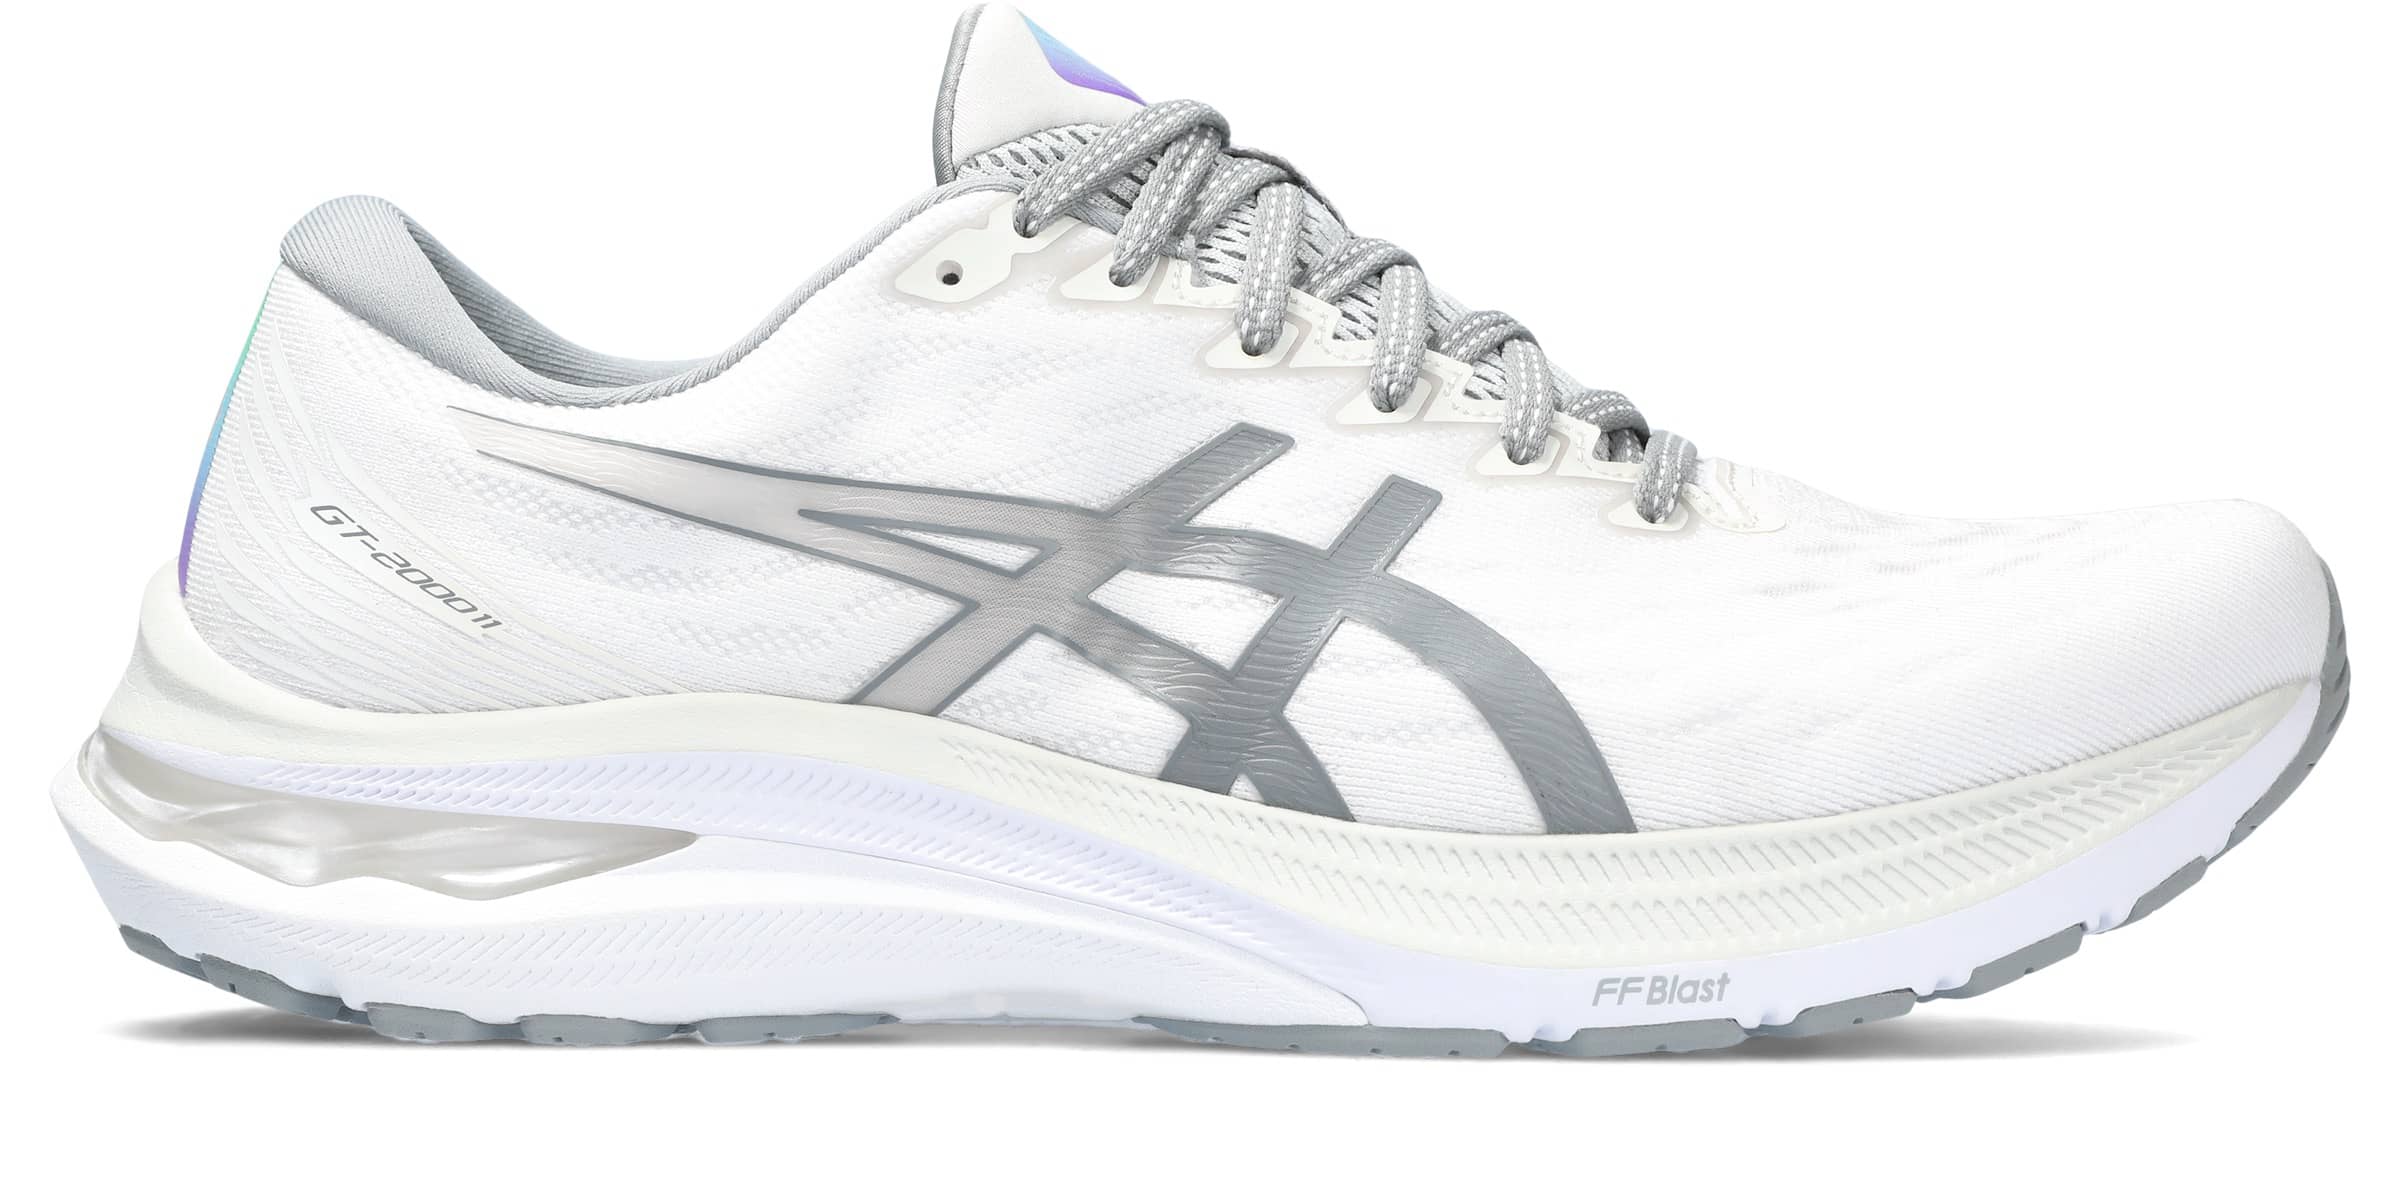 ASICS Shows Future Of Web3 Commerce With Launch Of New ASICS X 